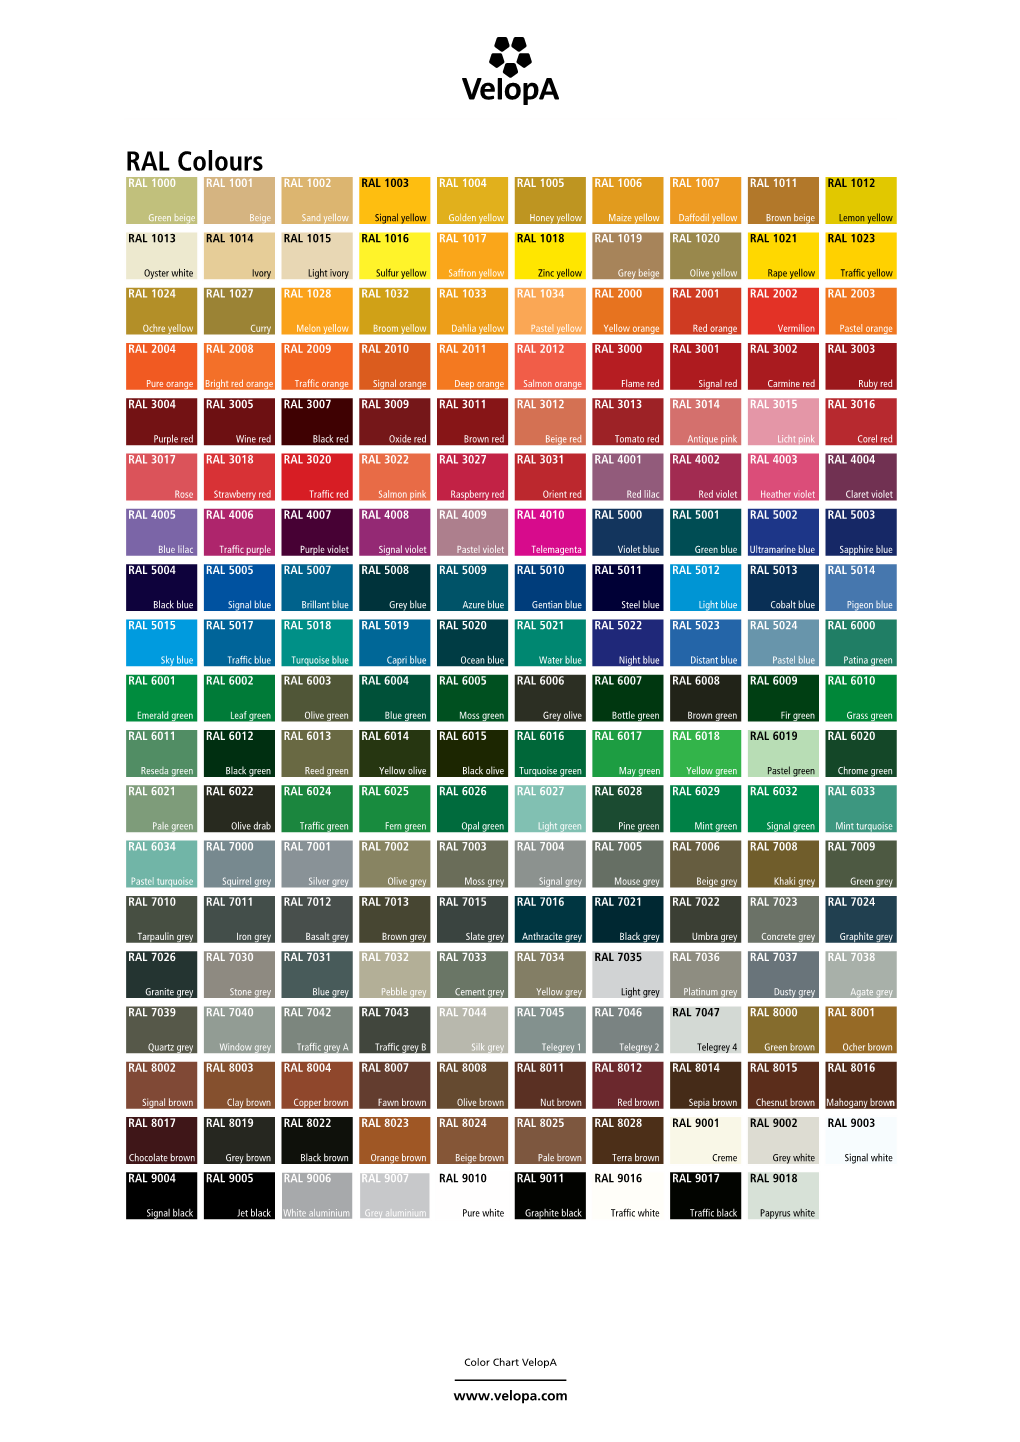 RAL Colours RAL 1000 RAL 1001 RAL 1002 RAL 1003 RAL 1004 RAL 1005 RAL 1006 RAL 1007 RAL 1011 RAL 1012